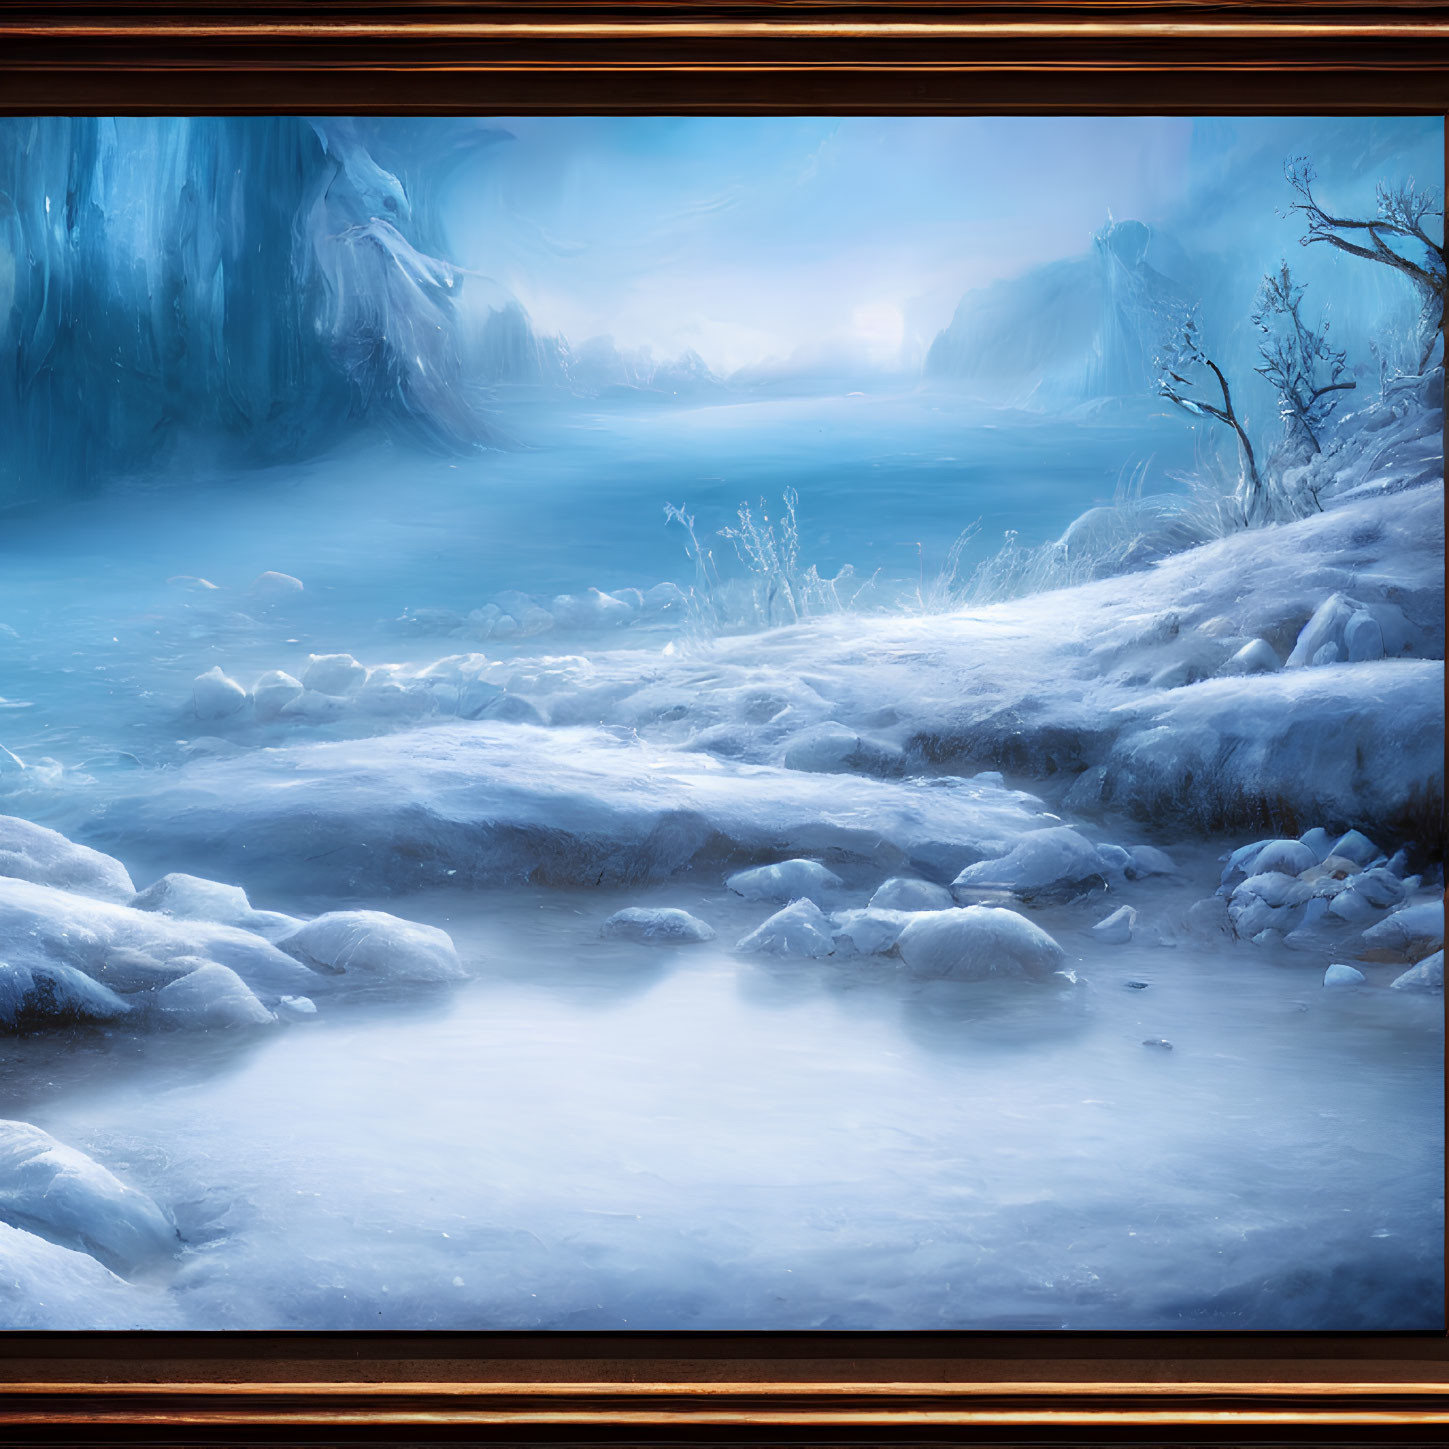 Winter Landscape Painting: Frozen Stream, Snow-Covered Banks